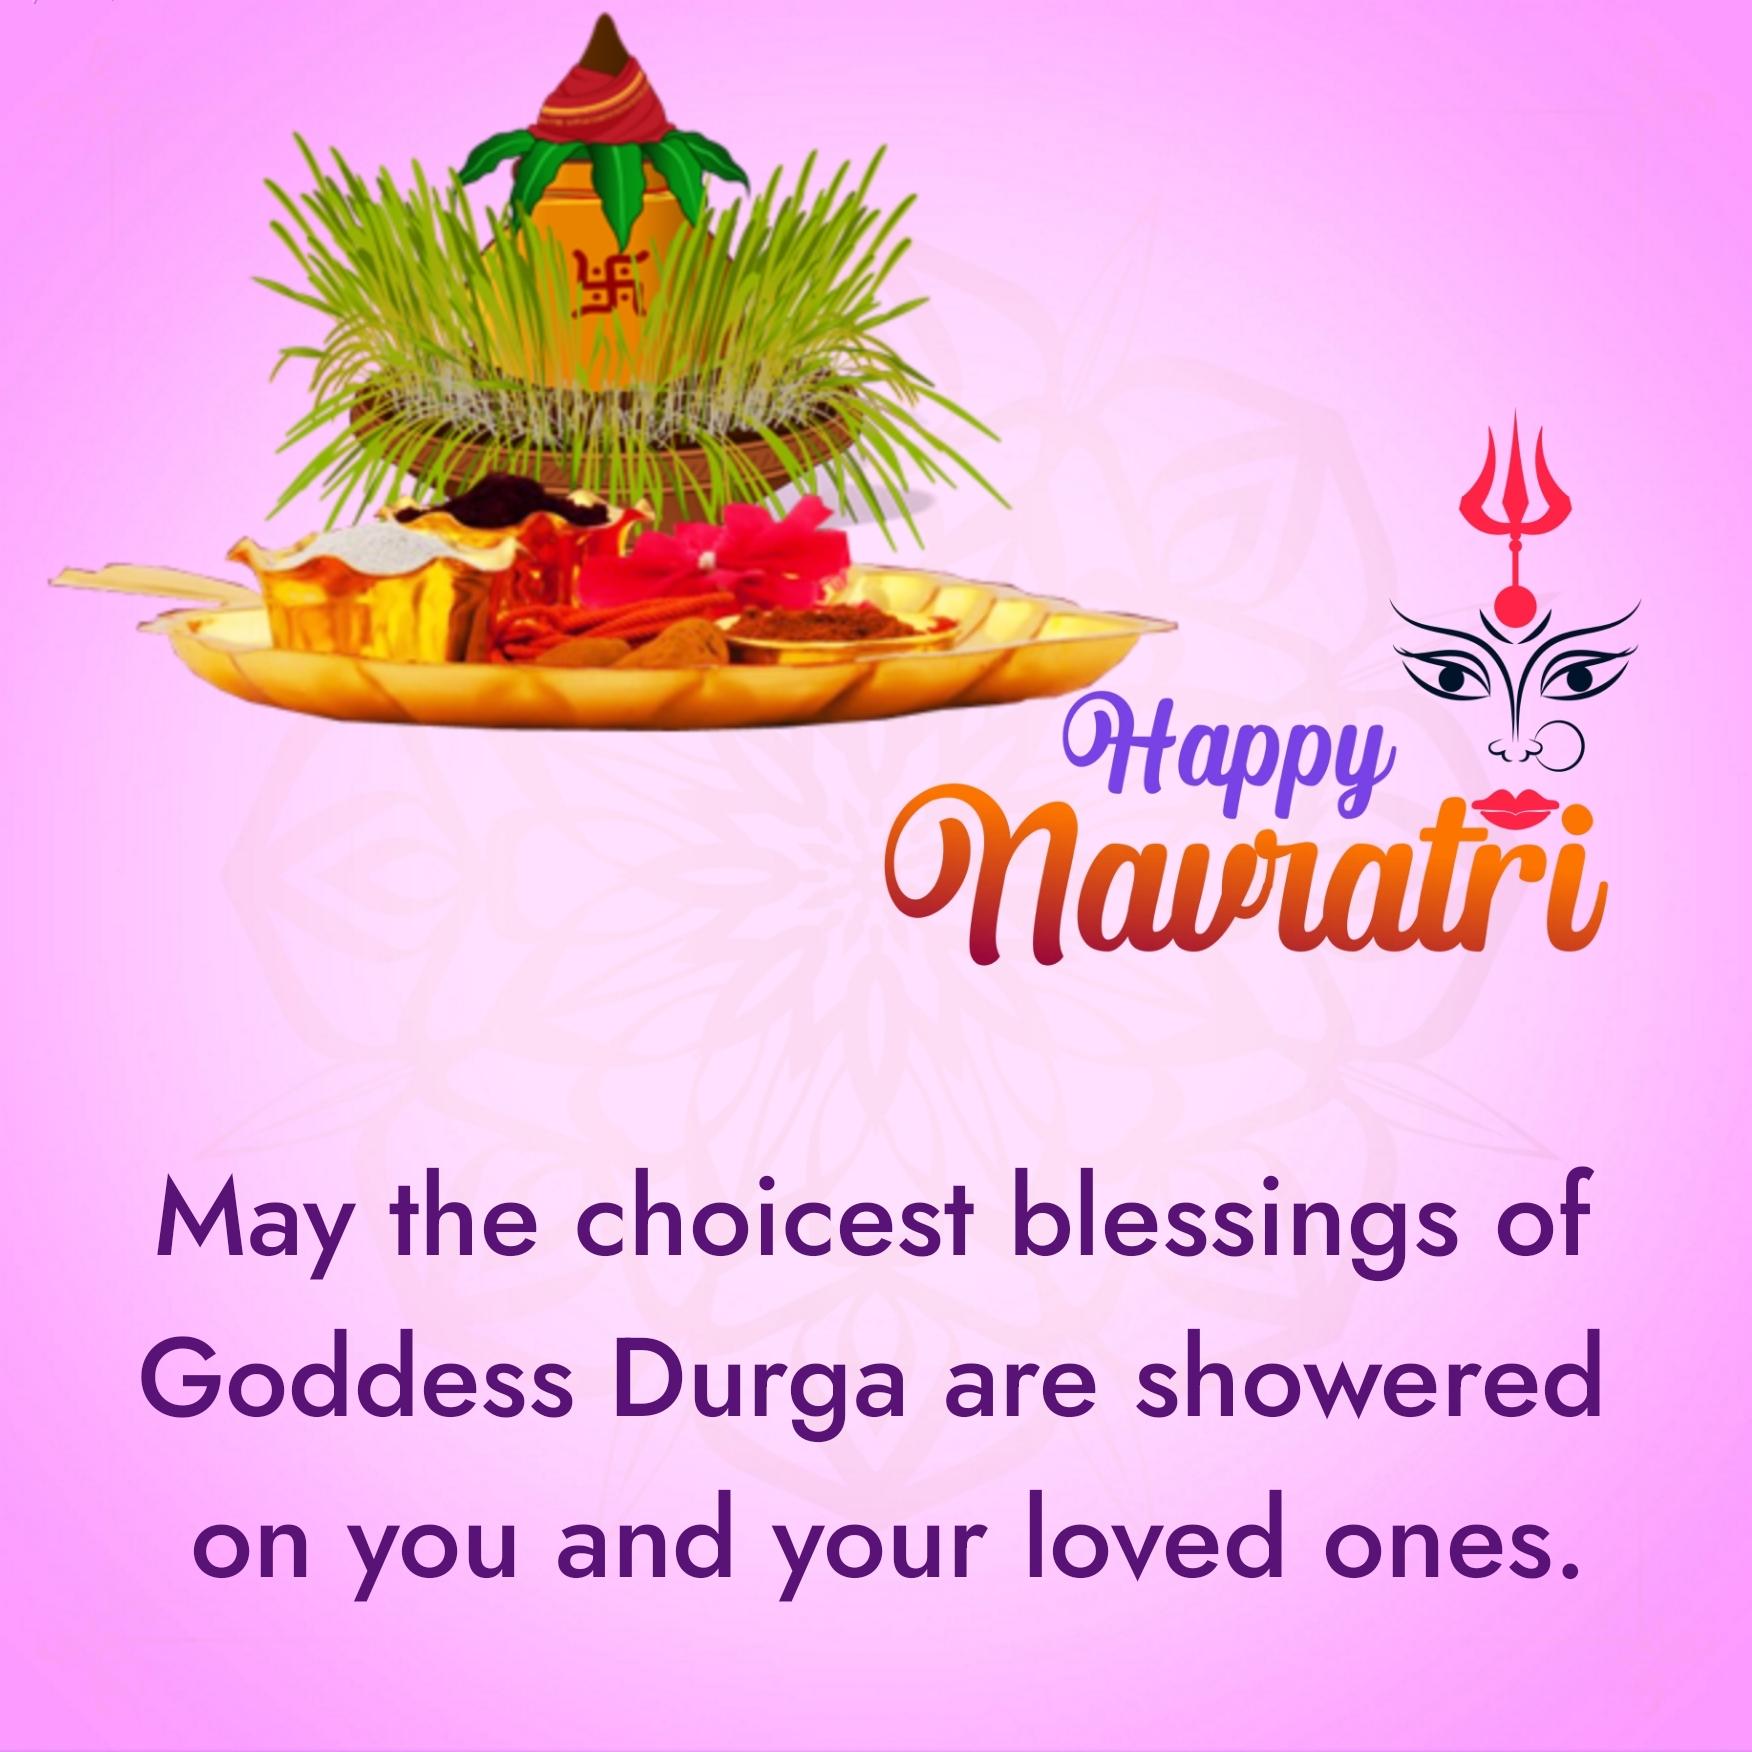 May the choicest blessings of Goddess Durga are showered